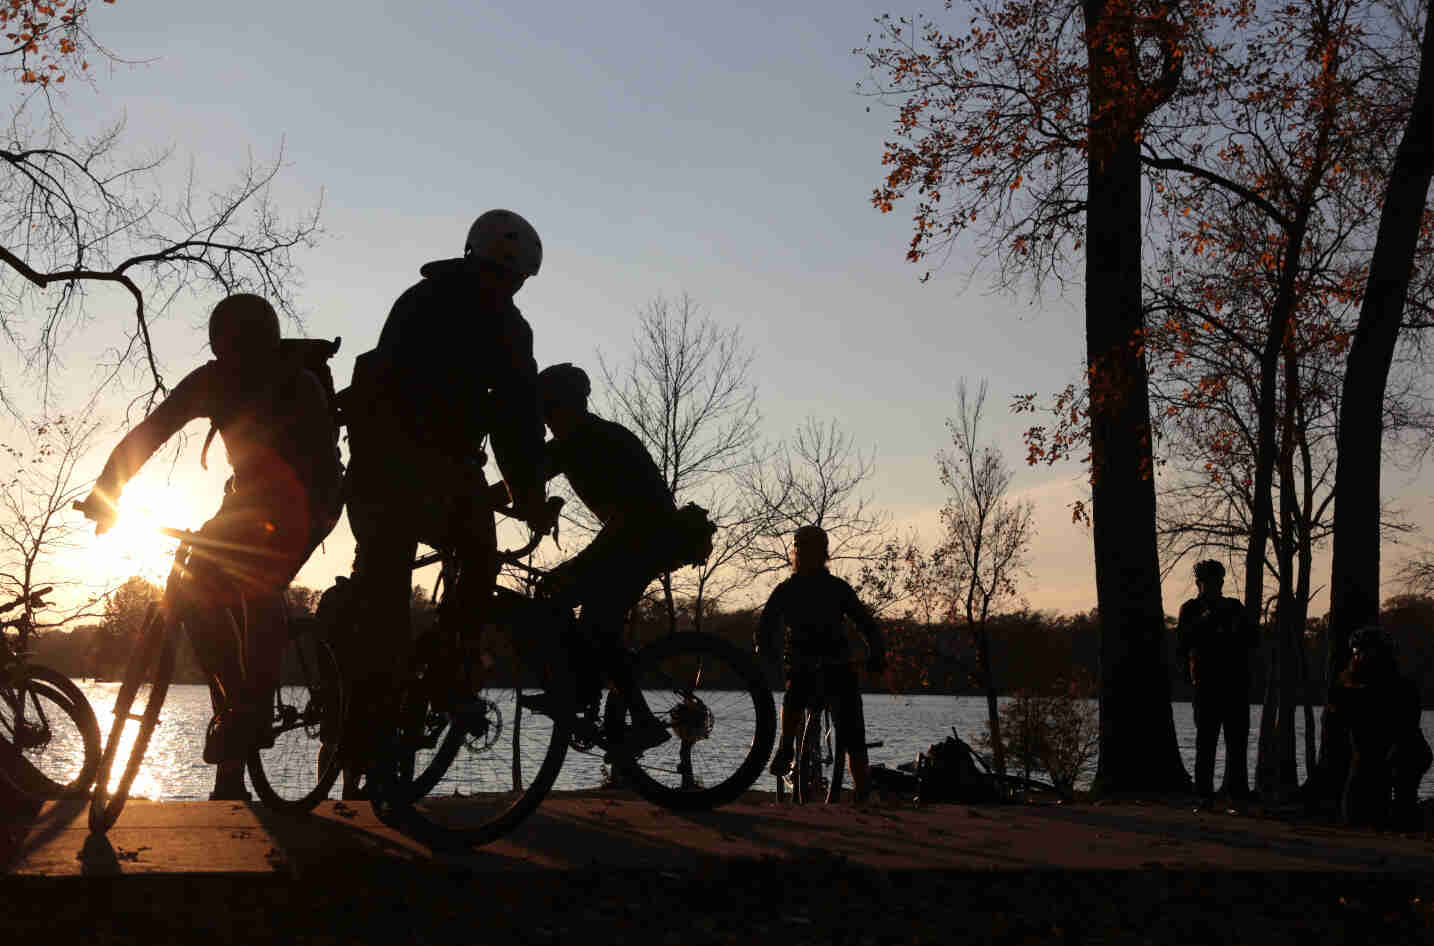 Silhouettes of  three cyclists riding their bikes in a circle, with a lake in the background, at dusk